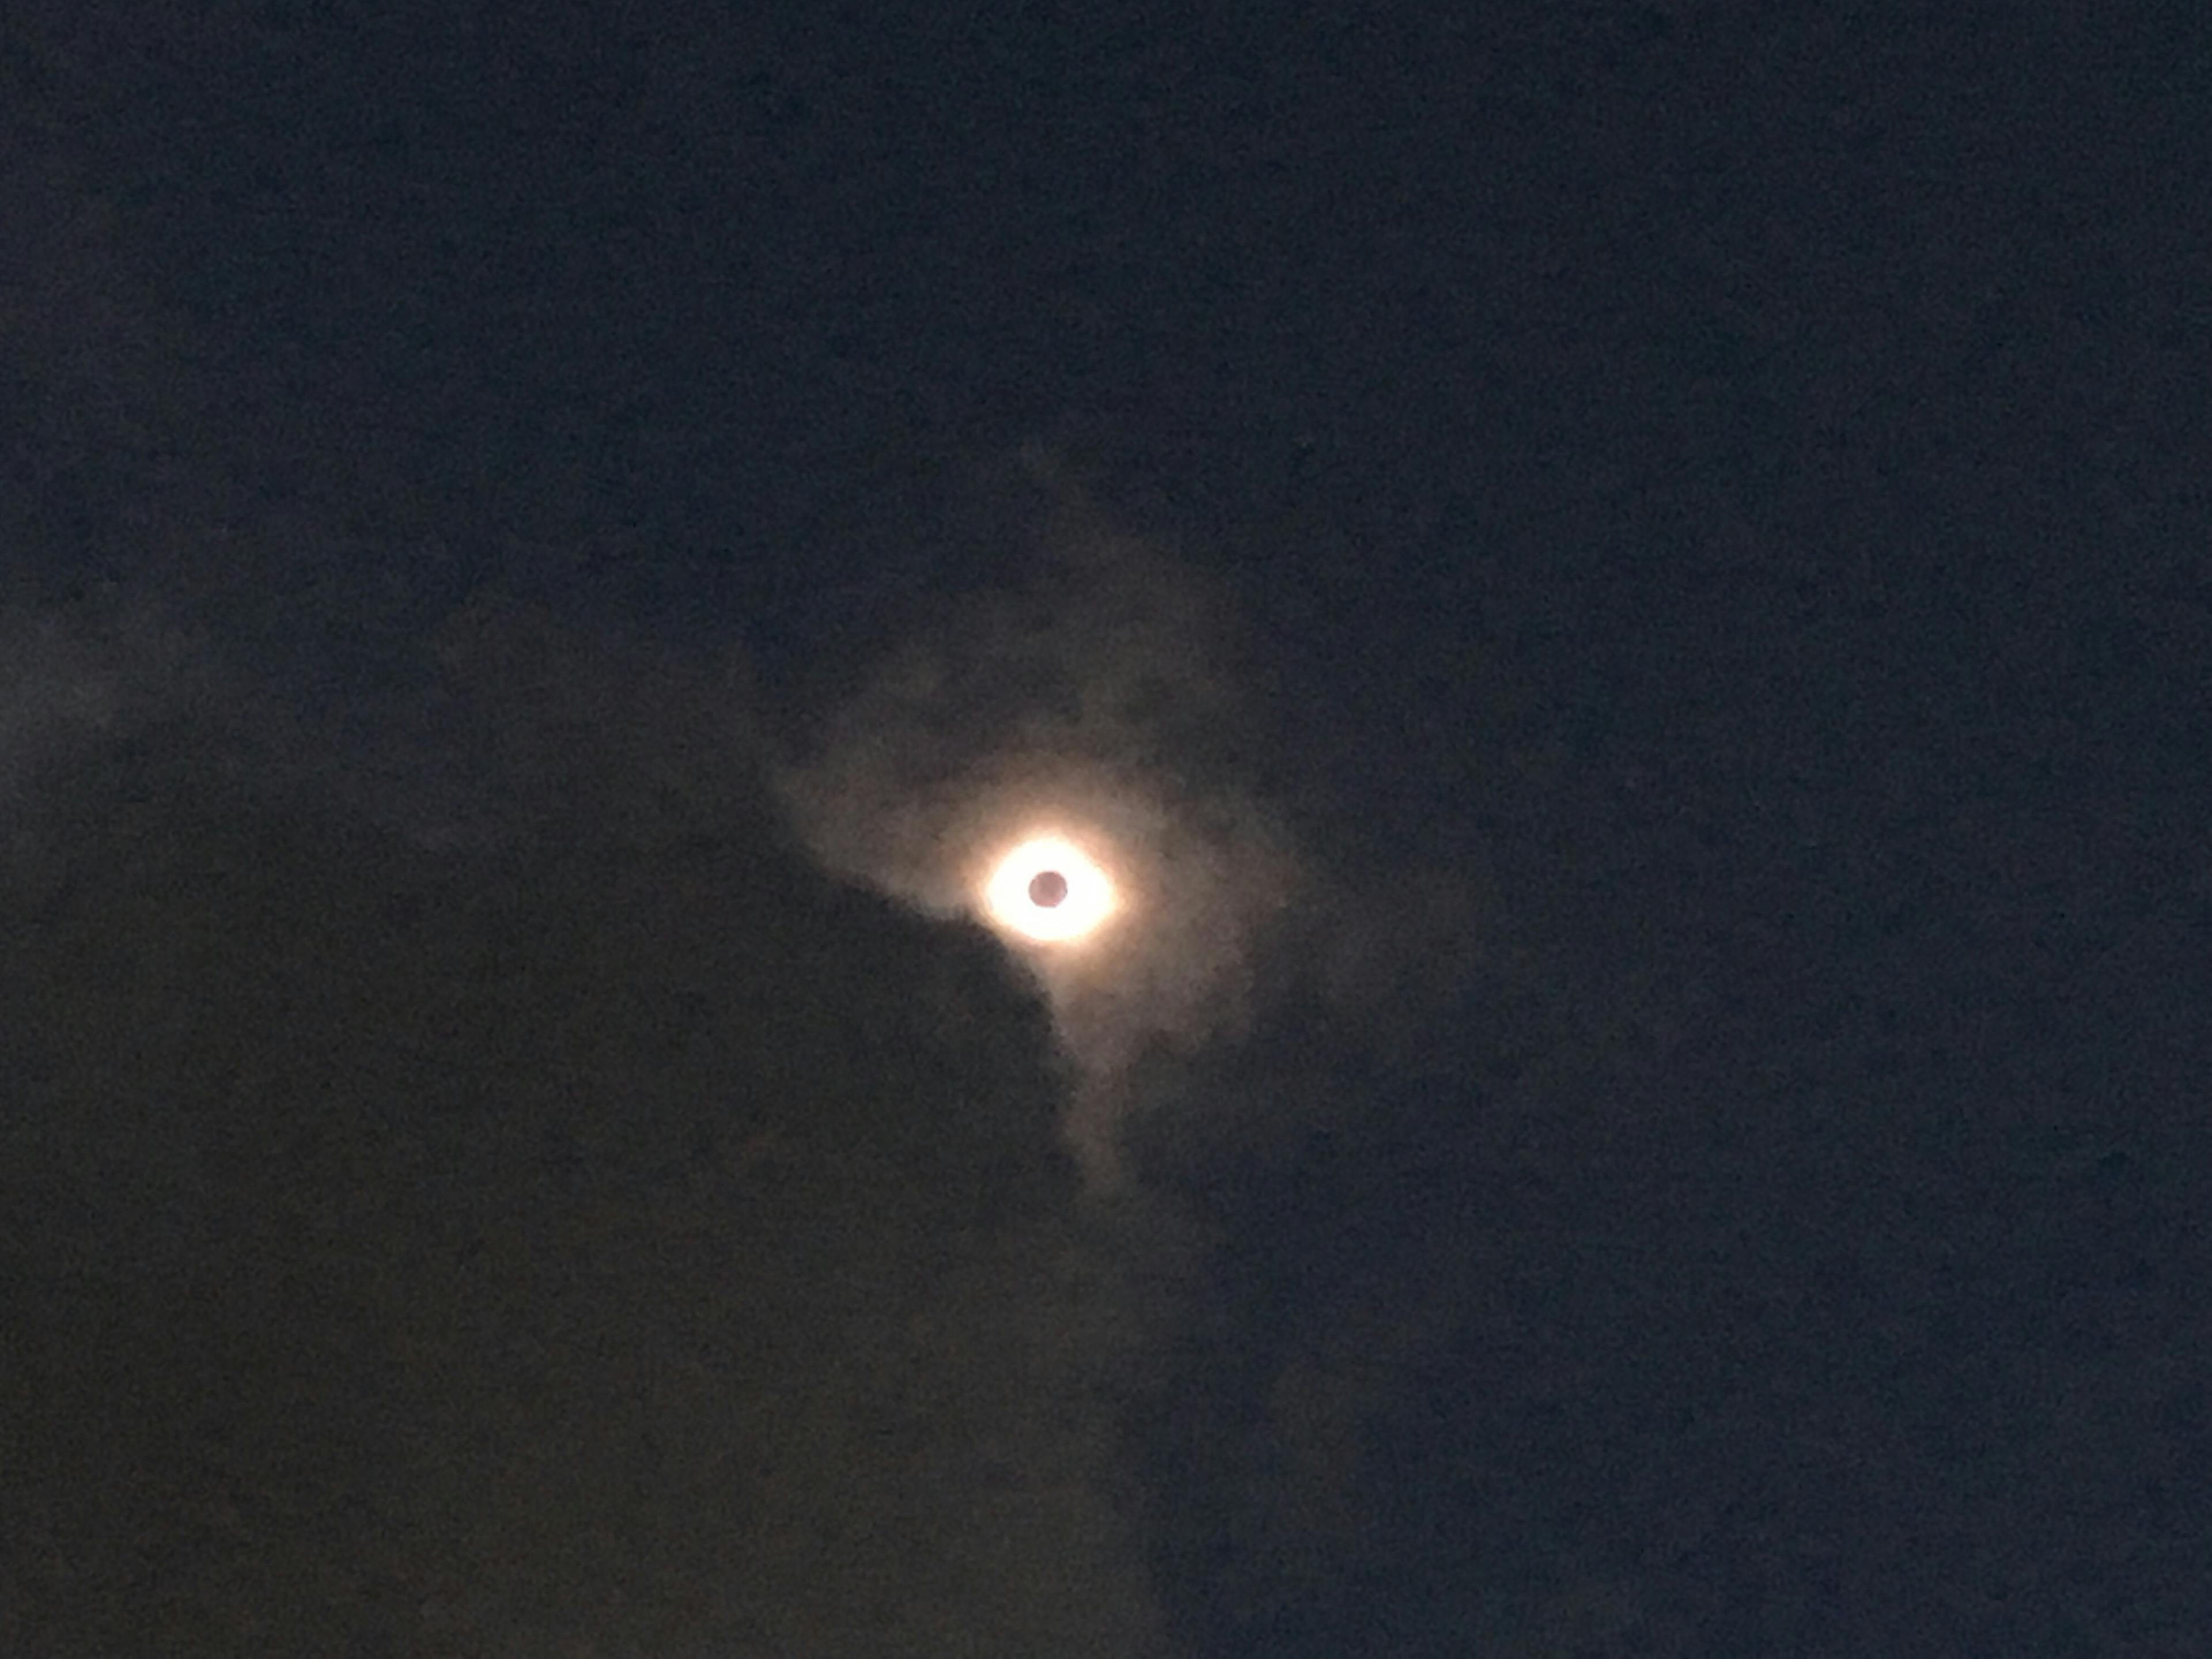 Seeing The Great American Eclipse